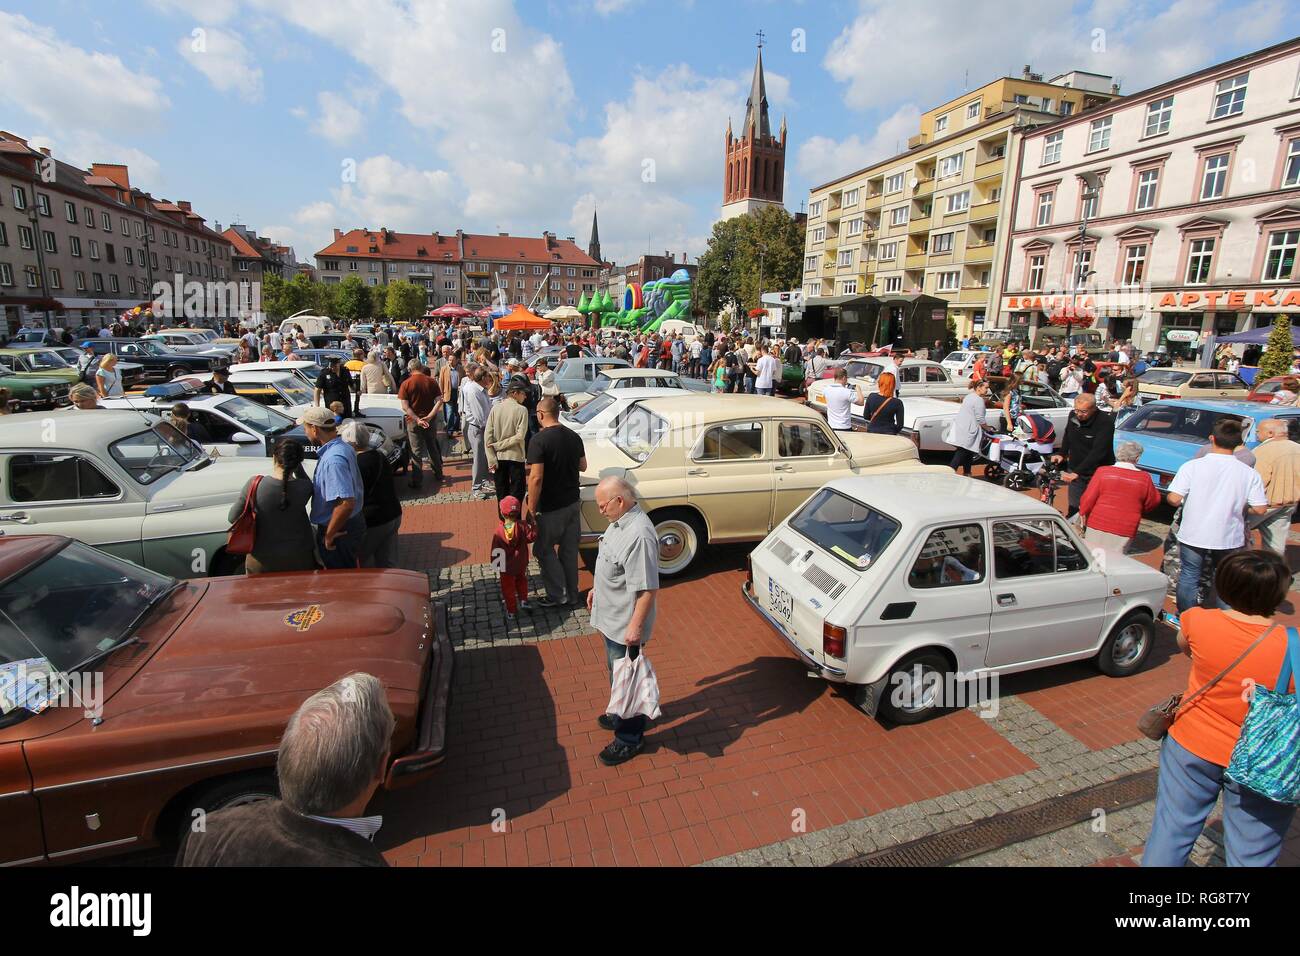 BYTOM, POLAND - SEPTEMBER 12, 2015: People admire classic oldtimer cars during 12th Historic Vehicle Rally in Bytom. The annual vehicle parade is one  Stock Photo